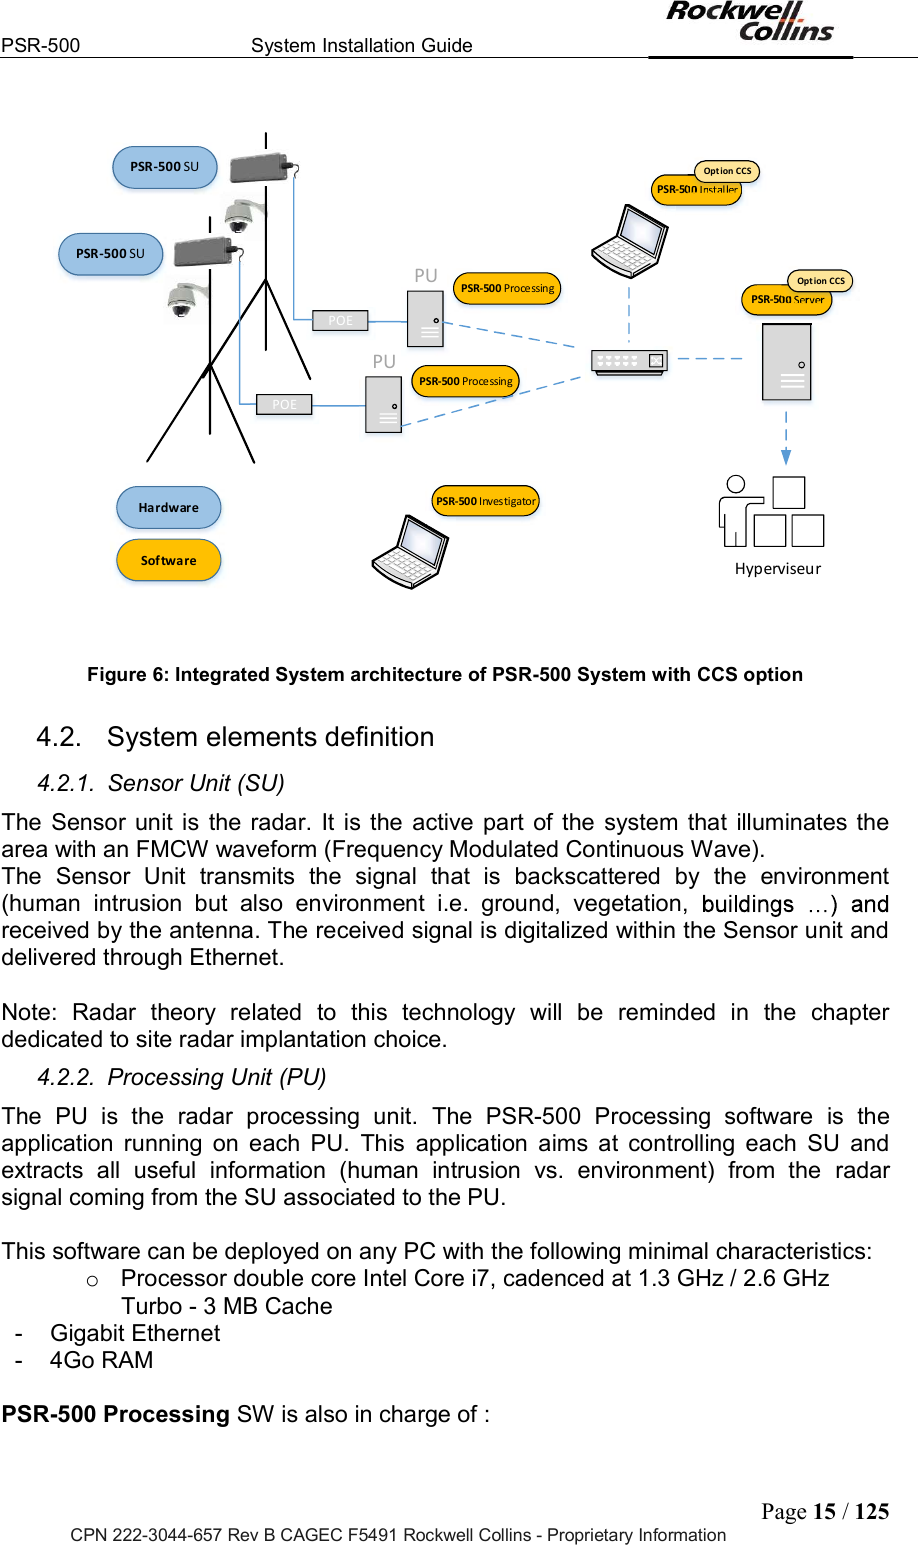 PSR-500  System Installation Guide  Page 15 / 125 CPN 222-3044-657 Rev B CAGEC F5491 Rockwell Collins - Proprietary Information POEPUPUPSR-500 SUPSR-500 SUHardwareSoftwarePSR-500 ServerPSR-500 InstallerPSR-500 ProcessingPSR-500 ProcessingPOEOption CCSOption CCSHyperviseurPSR-500 Investigator Figure 6: Integrated System architecture of PSR-500 System with CCS option  4.2.  System elements definition 4.2.1.  Sensor Unit (SU) The Sensor unit is the radar.  It is the active part of the  system that illuminates the area with an FMCW waveform (Frequency Modulated Continuous Wave).  The  Sensor  Unit  transmits  the  signal  that  is  backscattered  by  the  environment (human  intrusion  but  also  environment  i.e.  ground,  vegetation, received by the antenna. The received signal is digitalized within the Sensor unit and delivered through Ethernet.  Note:  Radar  theory  related  to  this  technology  will  be  reminded  in  the  chapter dedicated to site radar implantation choice.     4.2.2.  Processing Unit (PU) The  PU  is  the  radar  processing  unit.  The  PSR-500  Processing  software  is  the application  running  on  each  PU.  This  application  aims  at  controlling  each  SU  and extracts  all  useful  information  (human  intrusion  vs.  environment)  from  the  radar signal coming from the SU associated to the PU.  This software can be deployed on any PC with the following minimal characteristics:  o  Processor double core Intel Core i7, cadenced at 1.3 GHz / 2.6 GHz Turbo - 3 MB Cache  -  Gigabit Ethernet -  4Go RAM  PSR-500 Processing SW is also in charge of :  